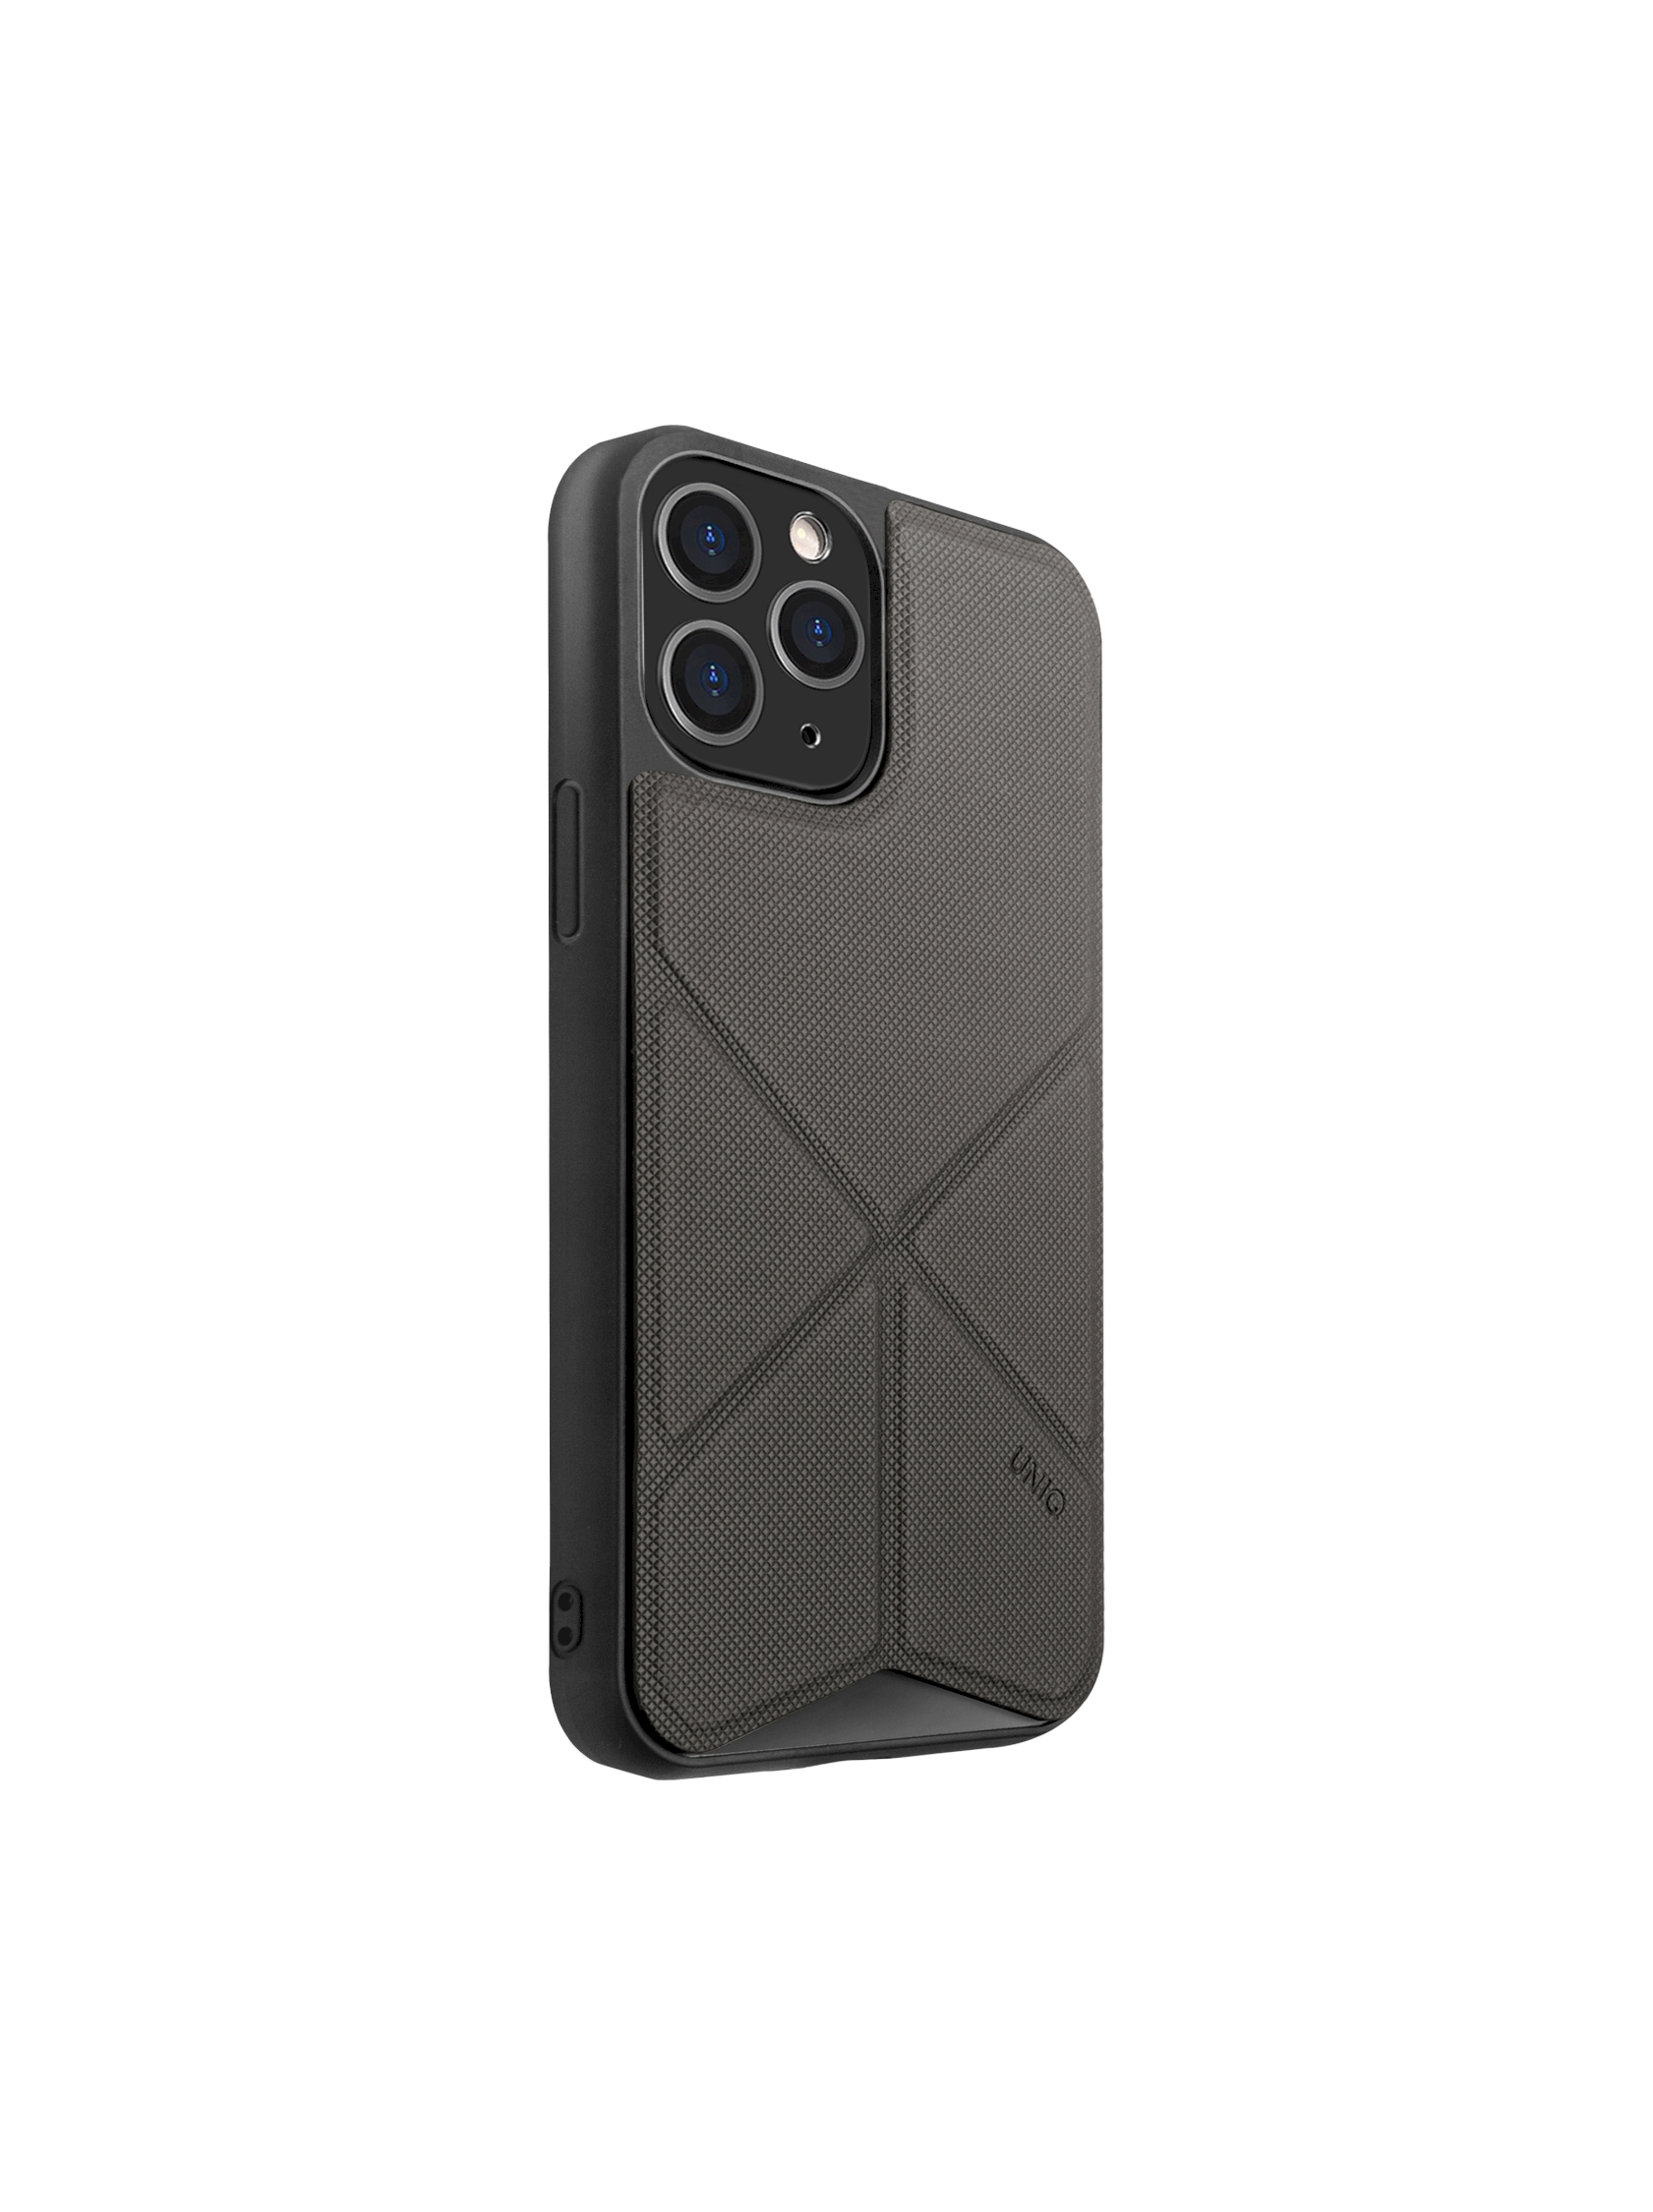 iPhone 12 Pro Max, case transforma, stand up charcoal, grey